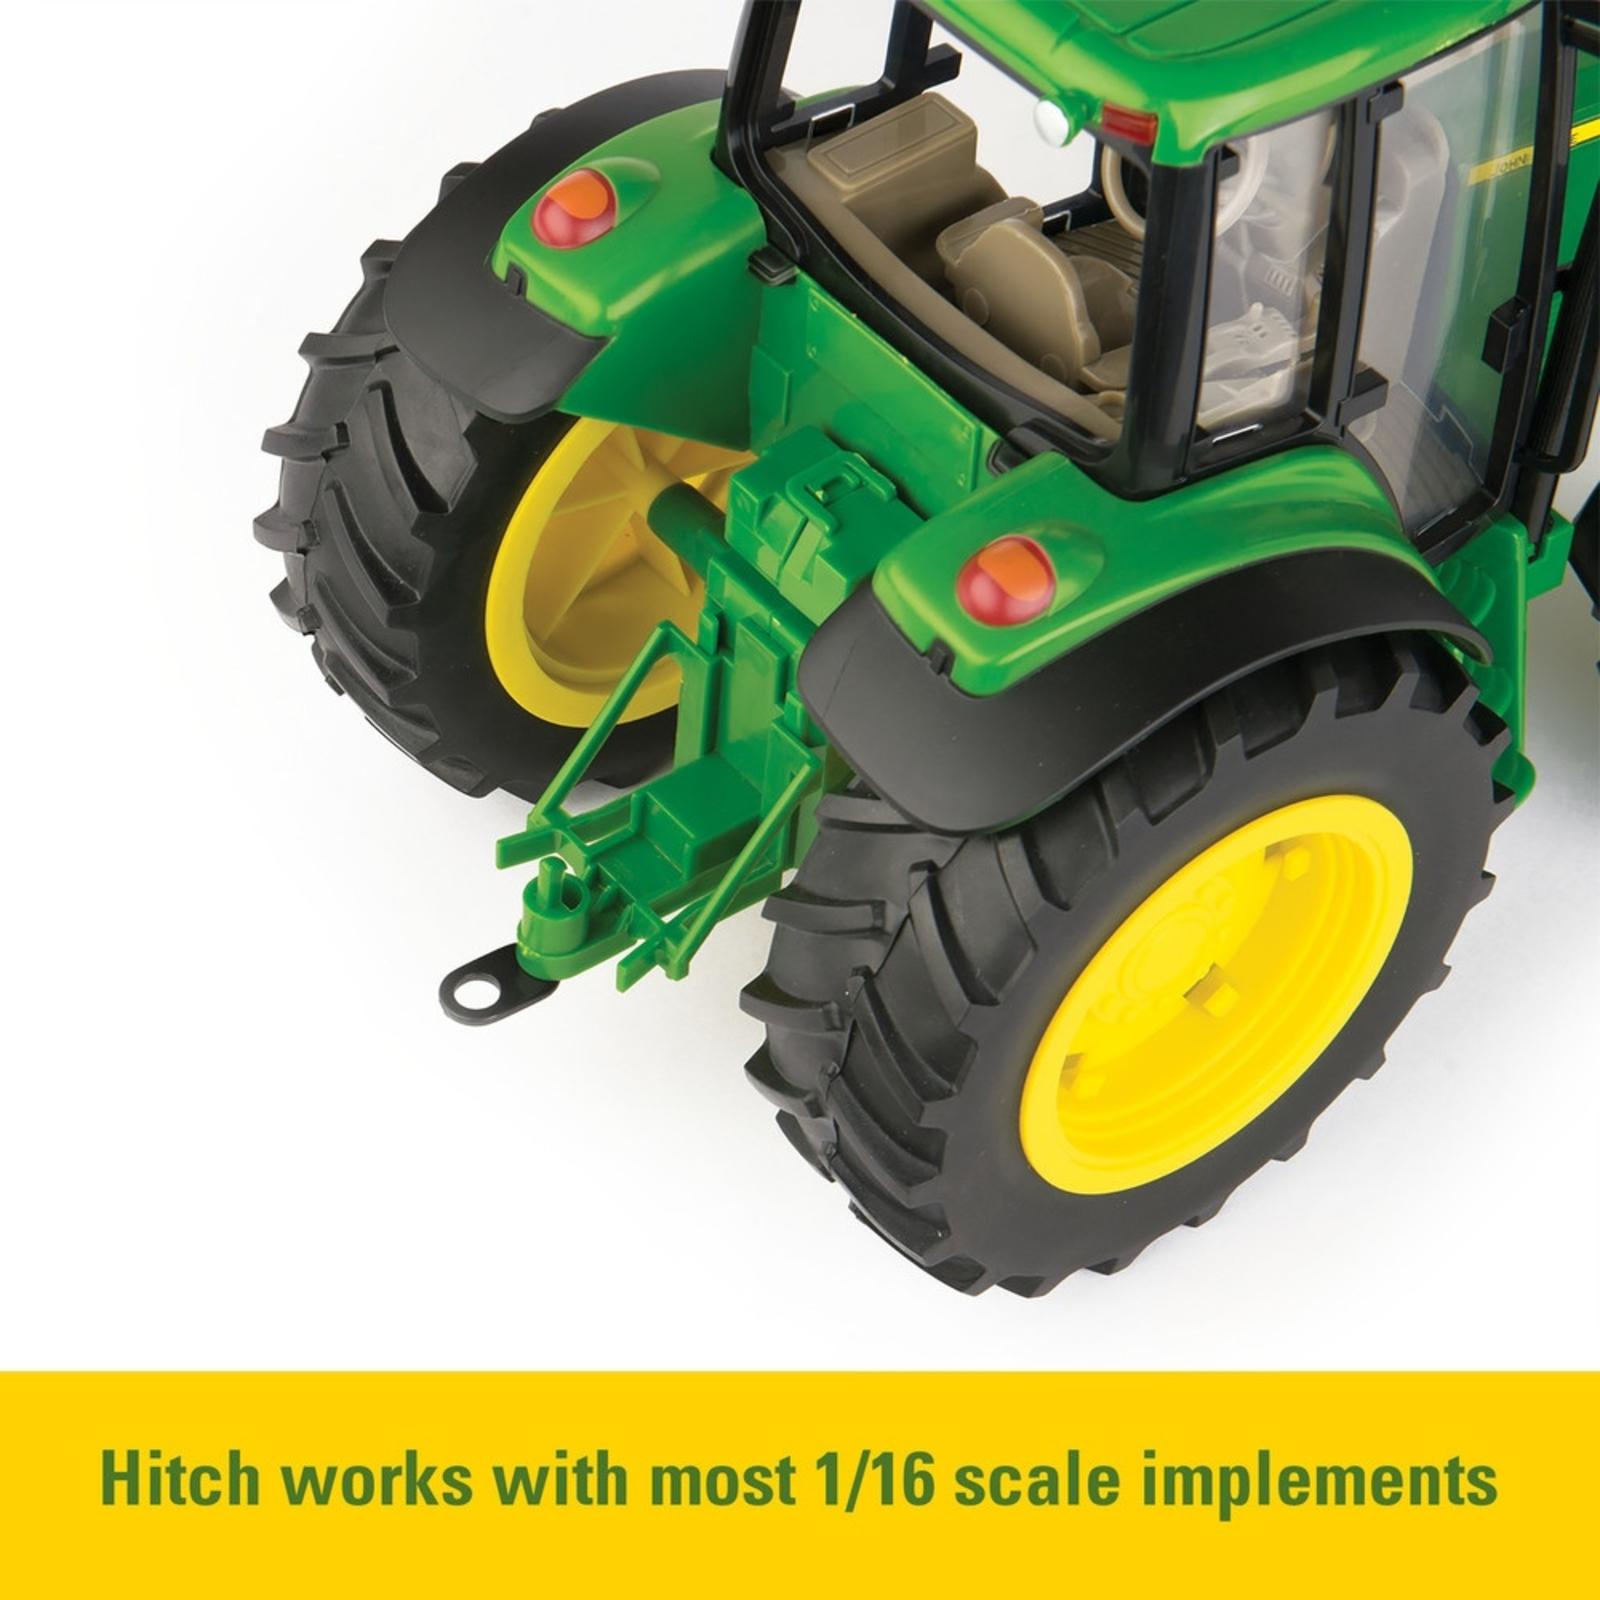 hitch works with most 1/ scale implements